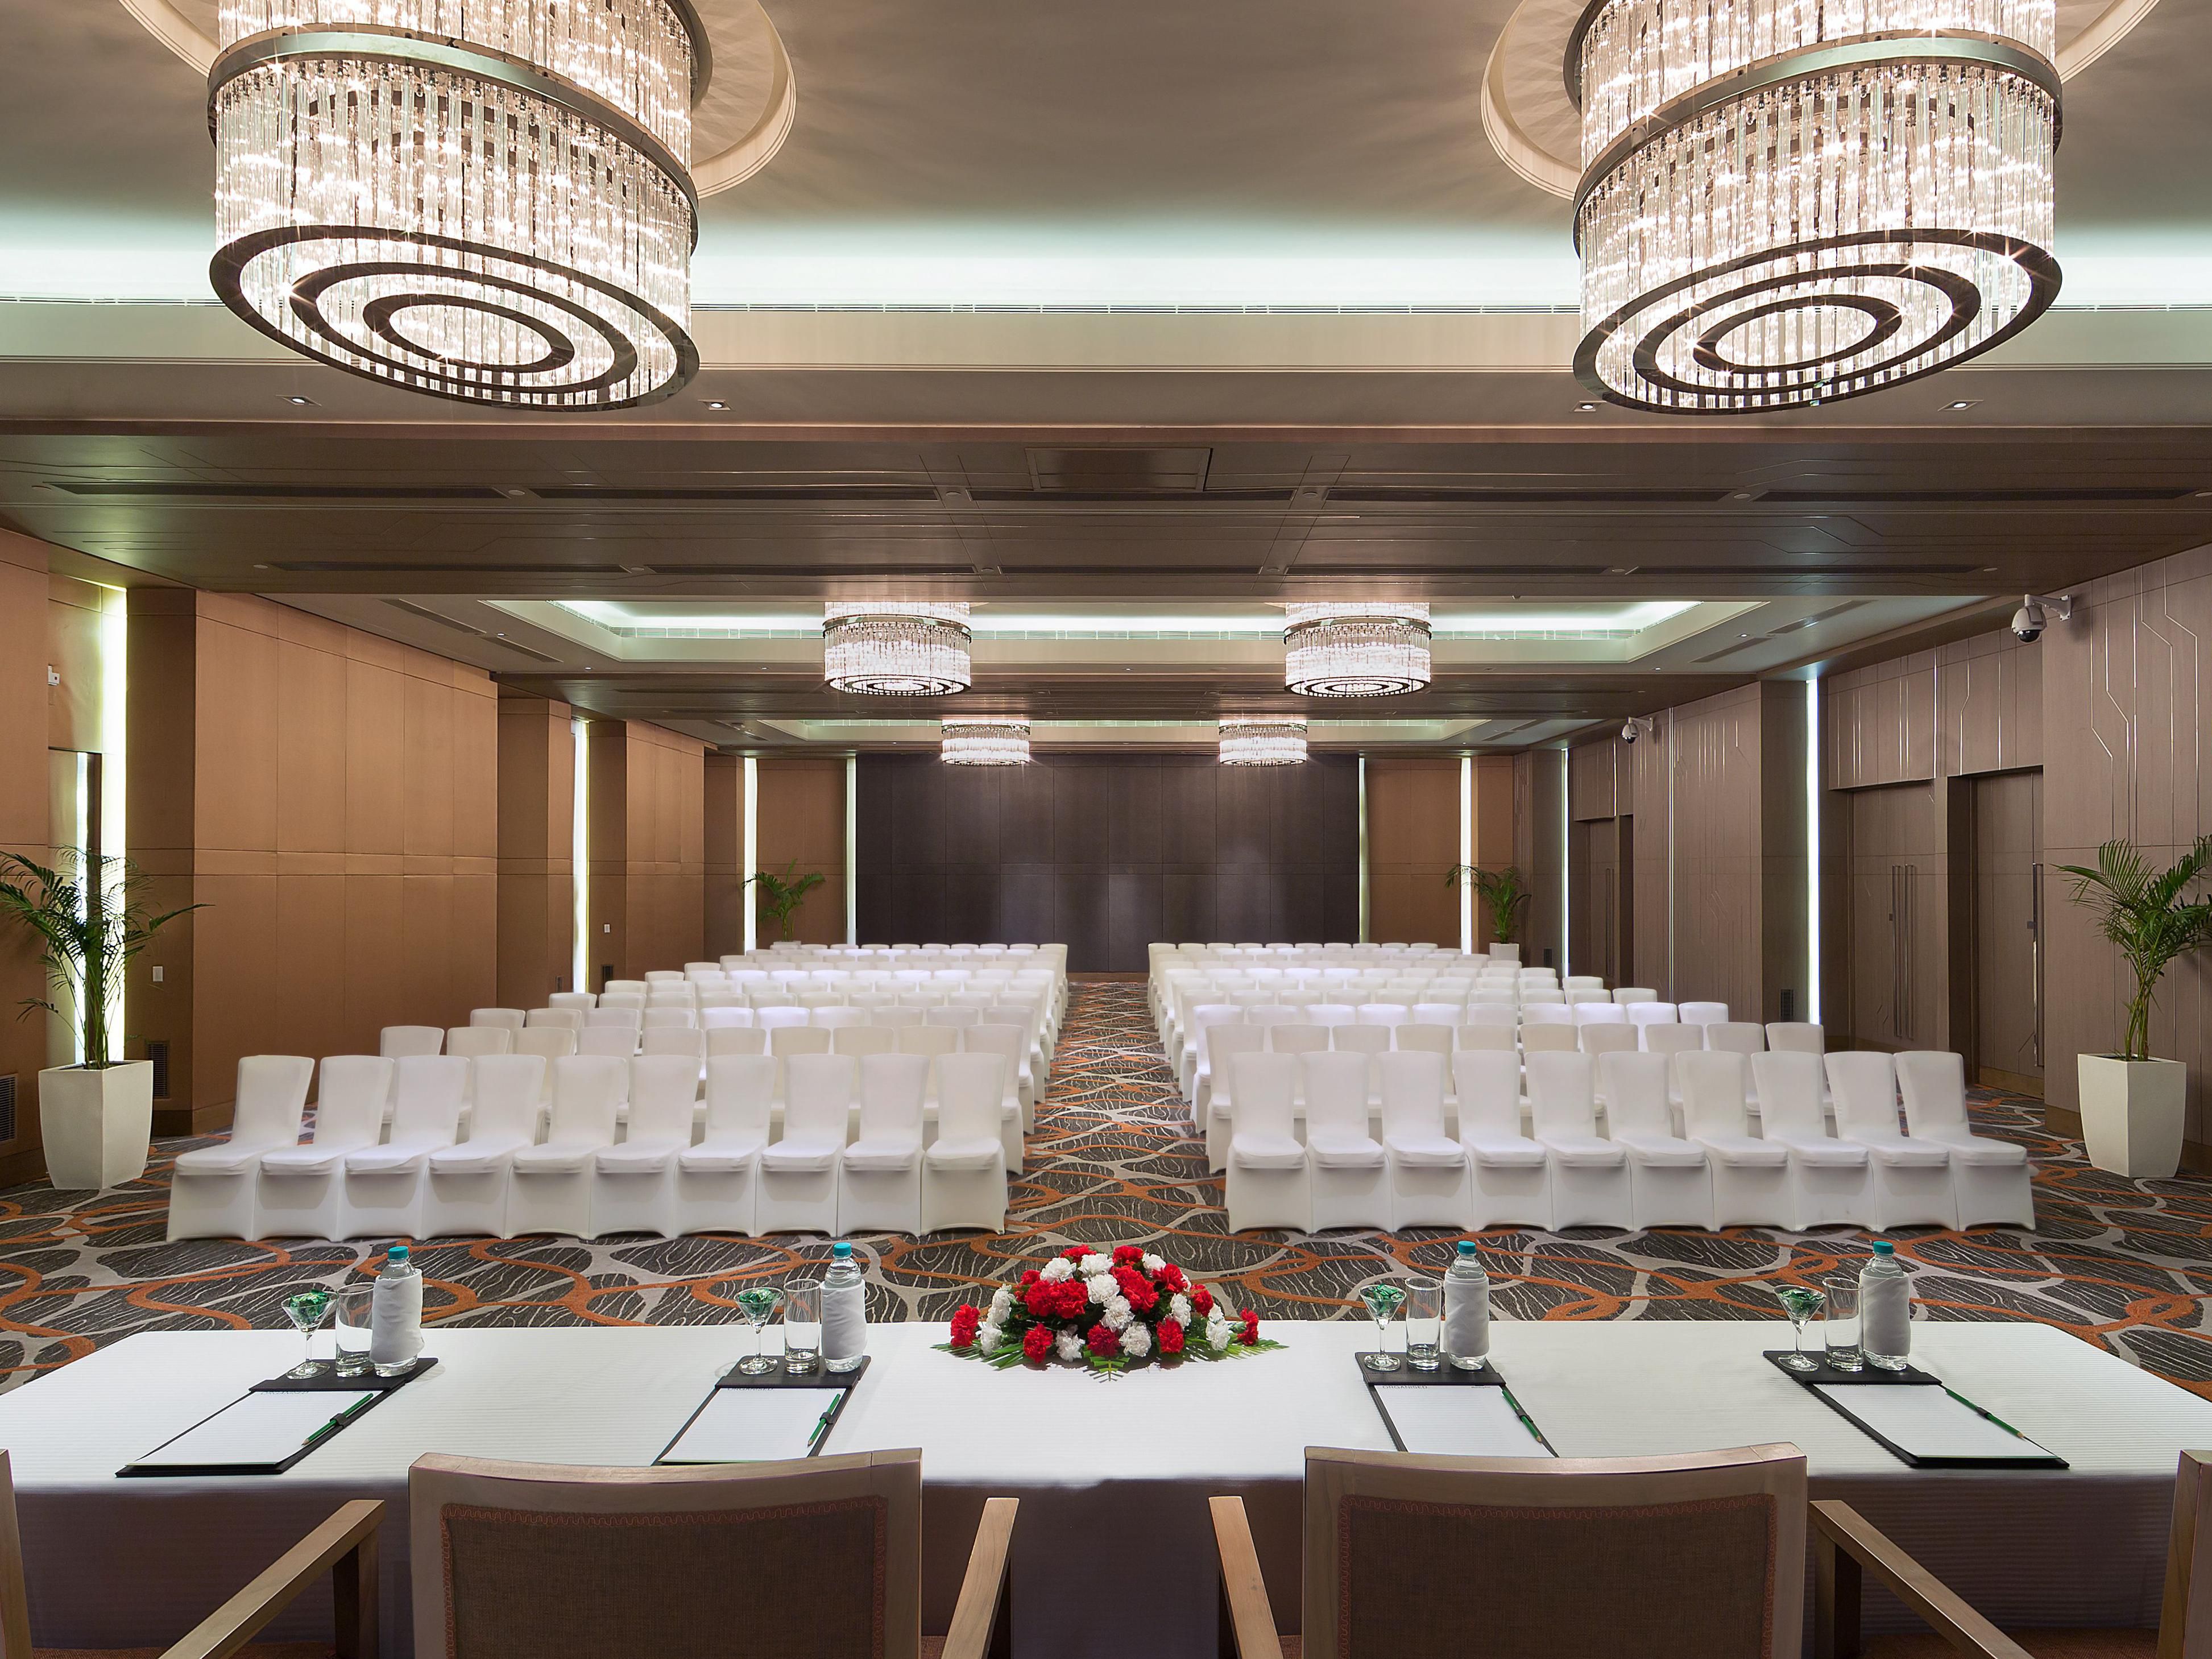 Within easy access of 5 Minute drive from Indira Gandhi International Airport and a short 15 Minute drive from the corporate hub of Gurugram and South Delhi, Holiday Inn New Delhi International Airport is the perfect place to host your next meeting. 

The 8000 square feet of flexible meeting space, is ideal for hosting 10 - 400 Guests.